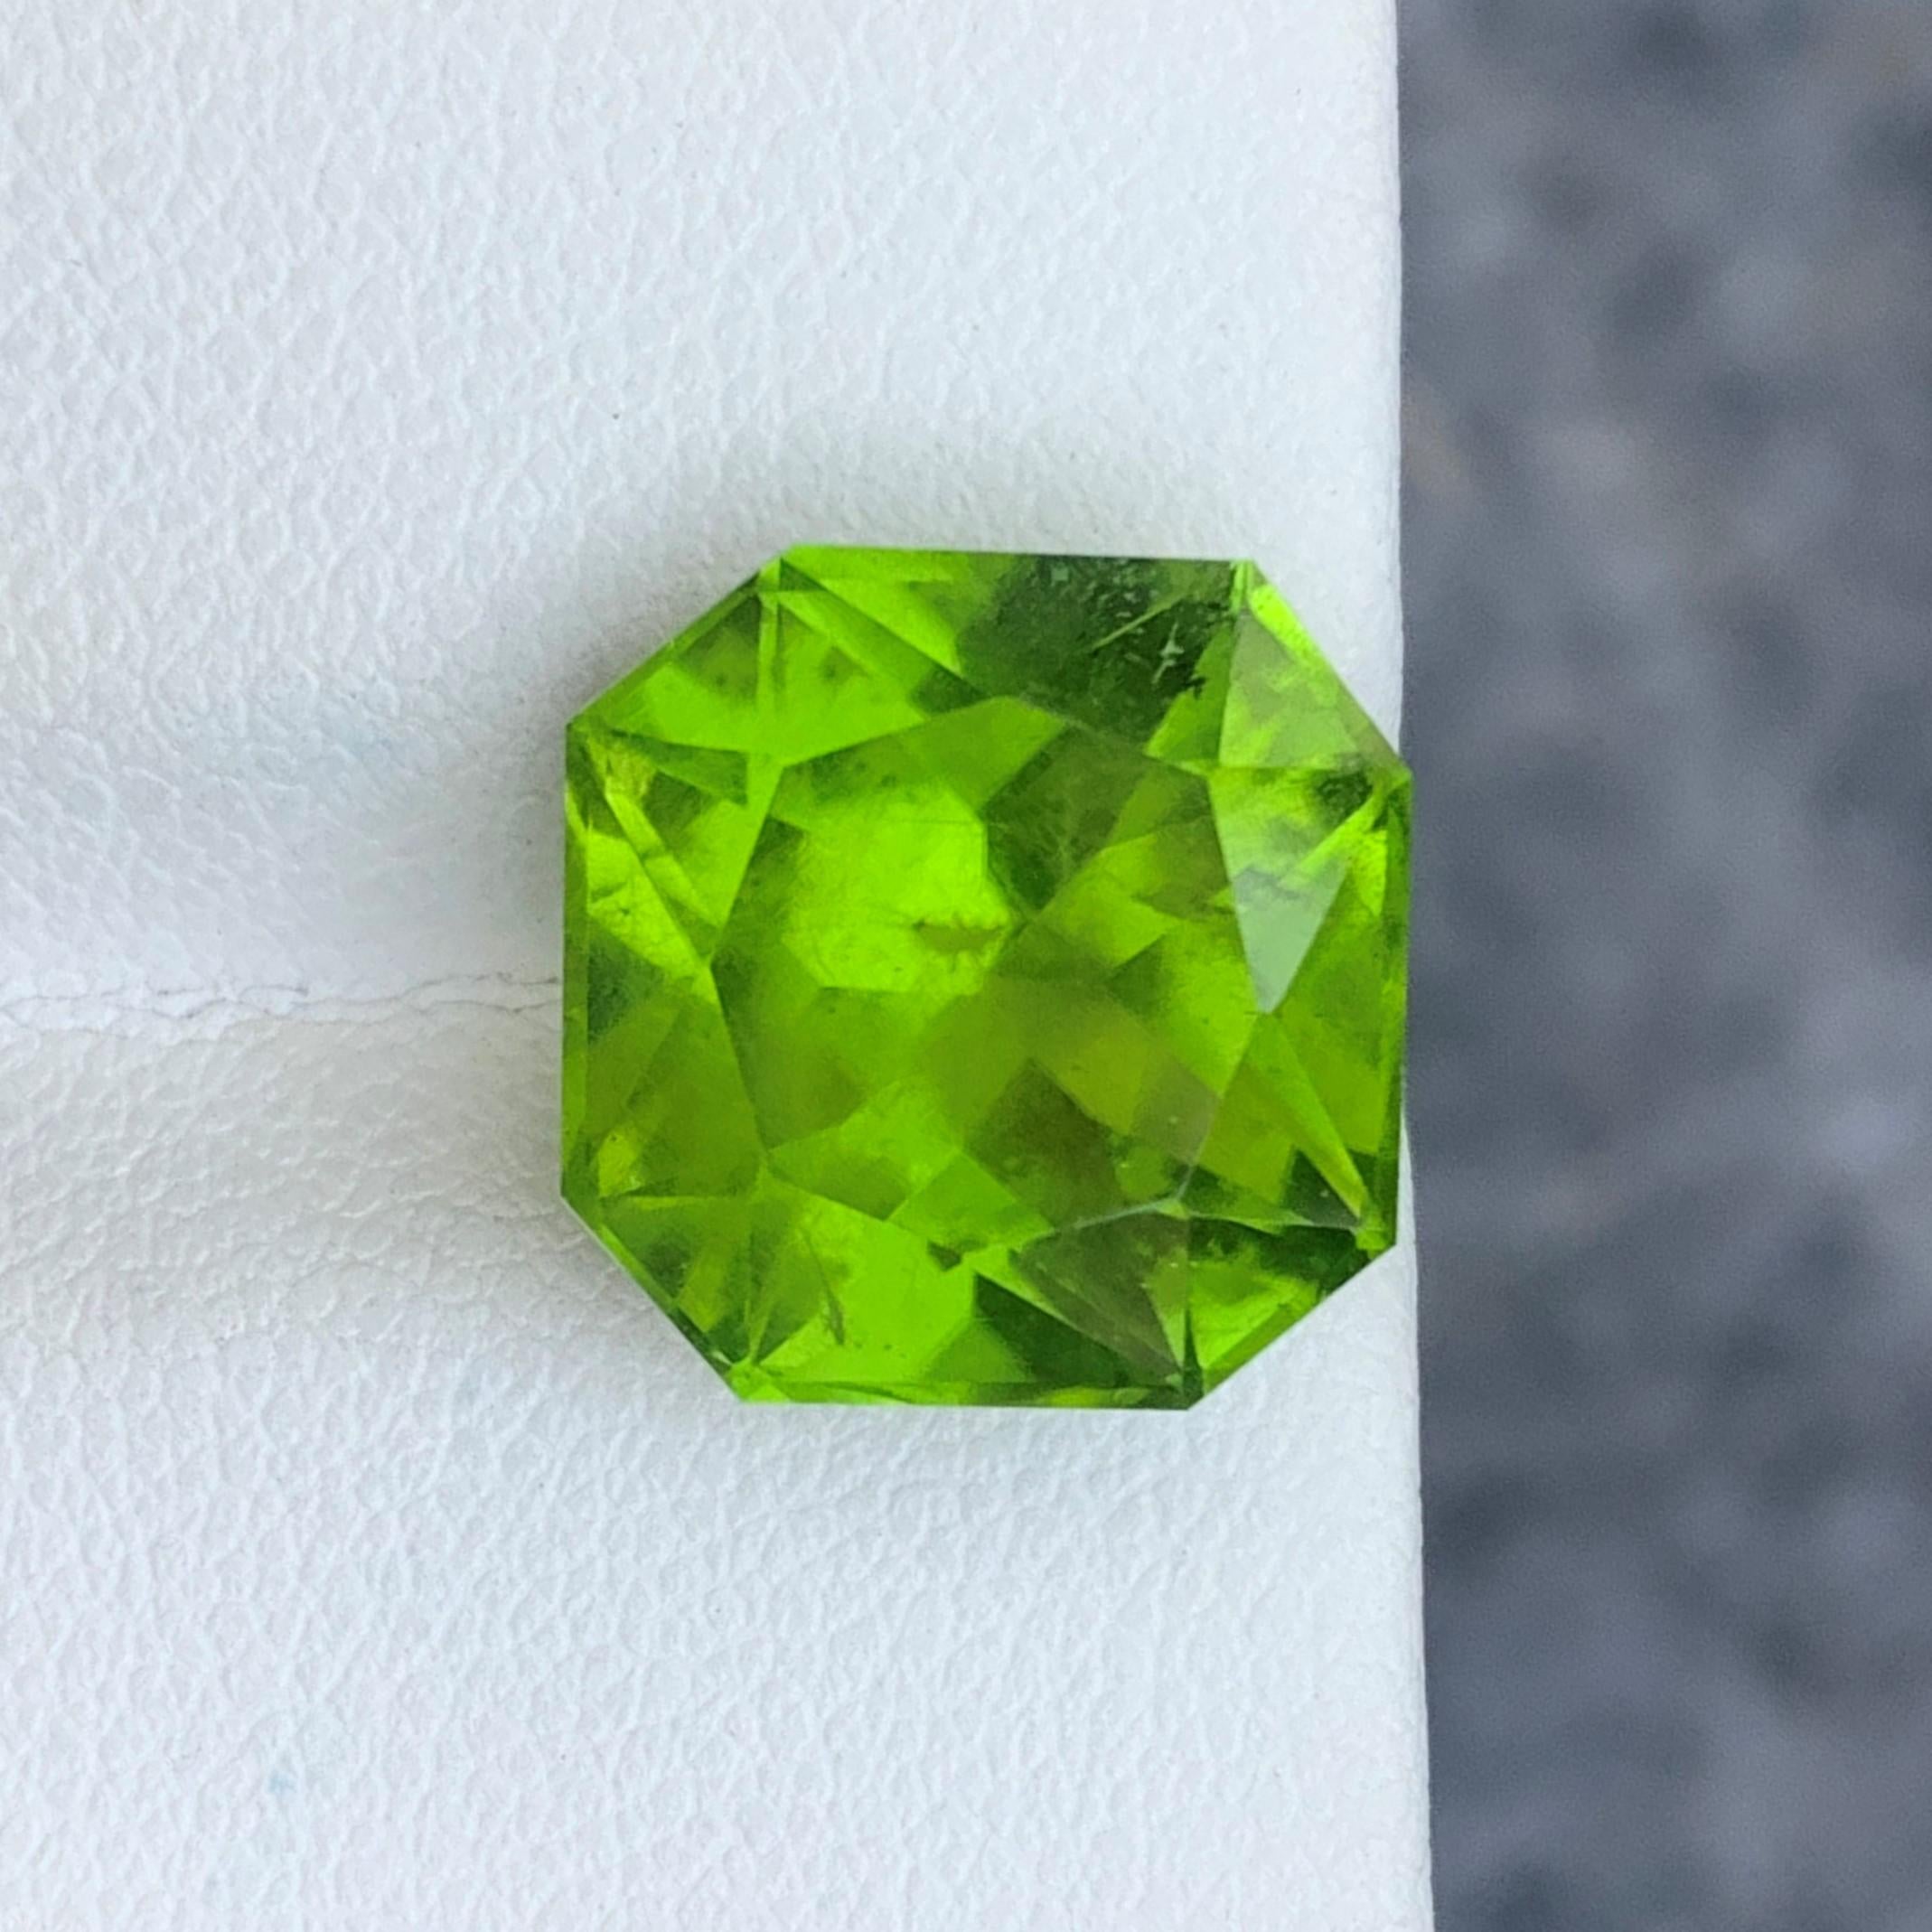 Gemstone Type : Peridot
Weight : 10.10 Carats
Dimension: 12.8x12.7x8.4 Mm 
Origin : Suppat Valley Pakistan
Clarity : Included
Certificate: On Demand
Color: Green
Treatment: Non
Shape: Octagon
It helps cure diseases related to lungs, breasts,